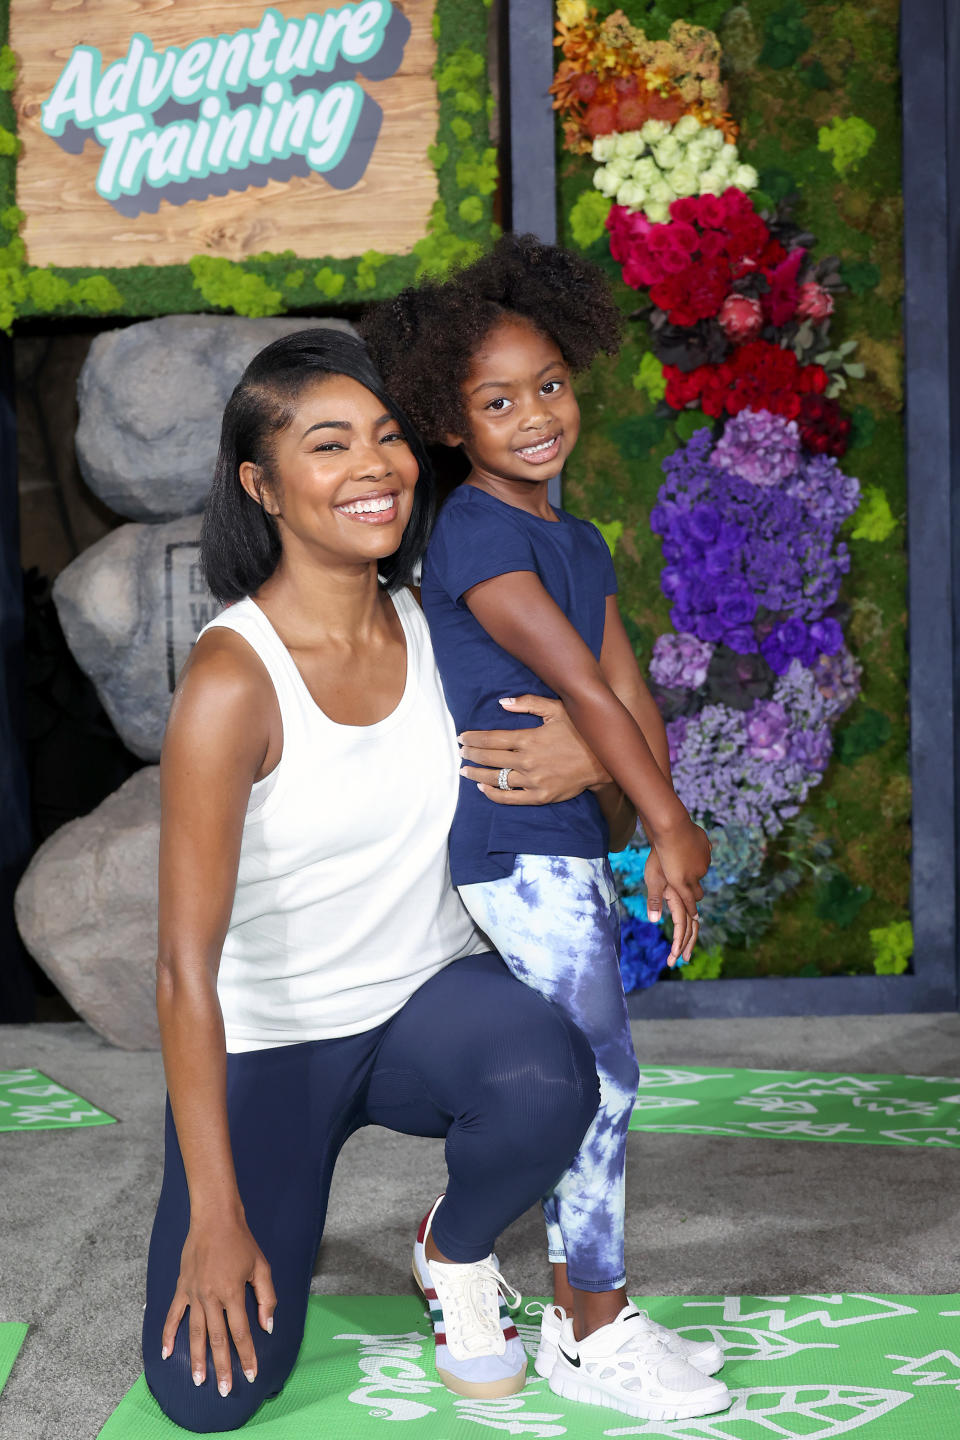 GARDEN GROVE, CALIFORNIA - SEPTEMBER 14: (L-R) Gabrielle Union and Kaavia James Union Wade are seen during the Launch of New Adventure Training Program with Gabrielle Union at Great Wolf Lodge on September 14, 2023 in Garden Grove, California. (Photo by Monica Schipper/Getty Images)